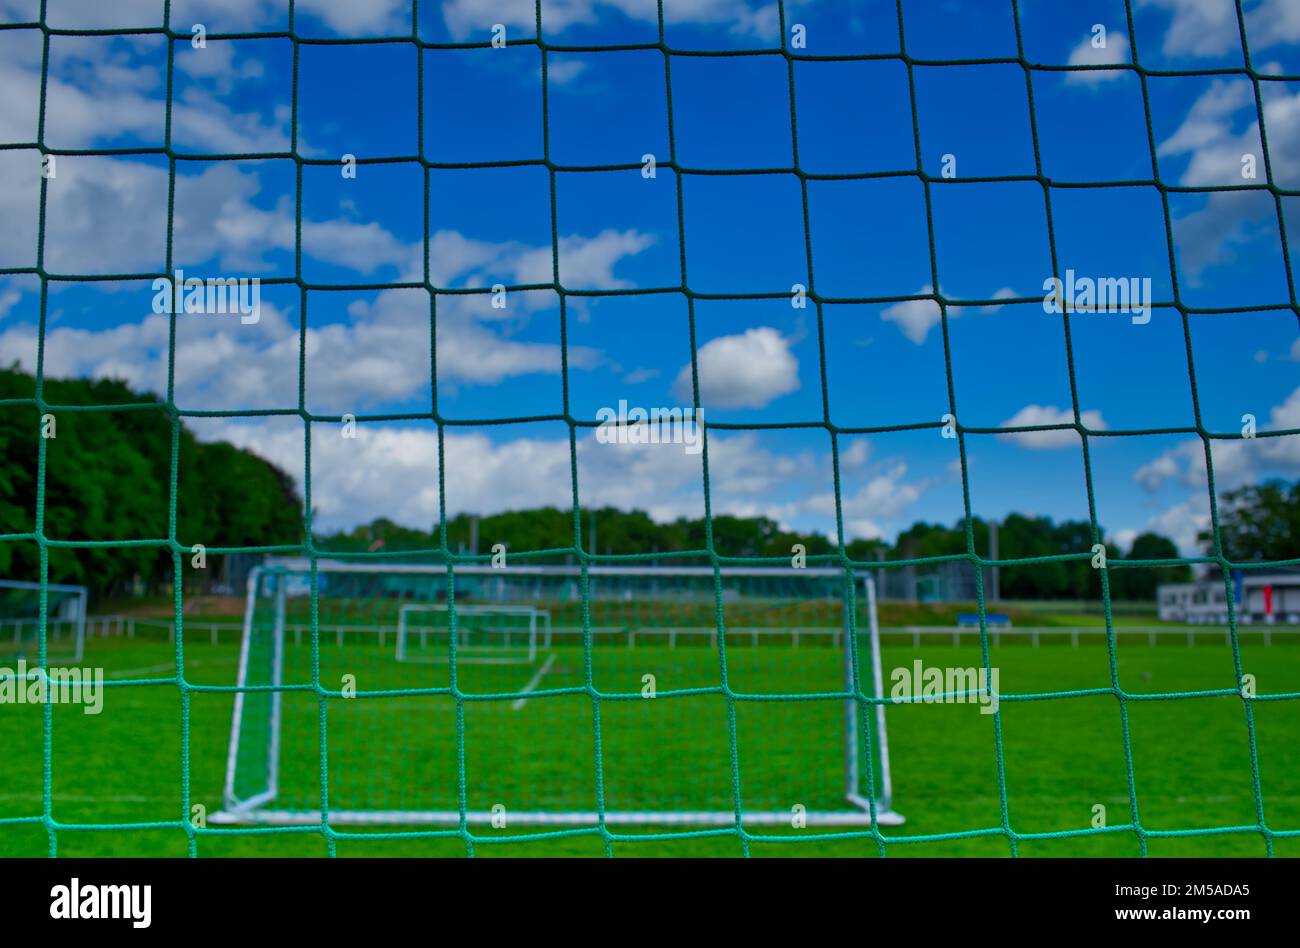 view through a soccer goal net at a deserted sports field with fresh green lawn and a blue sky (variation B) Stock Photo